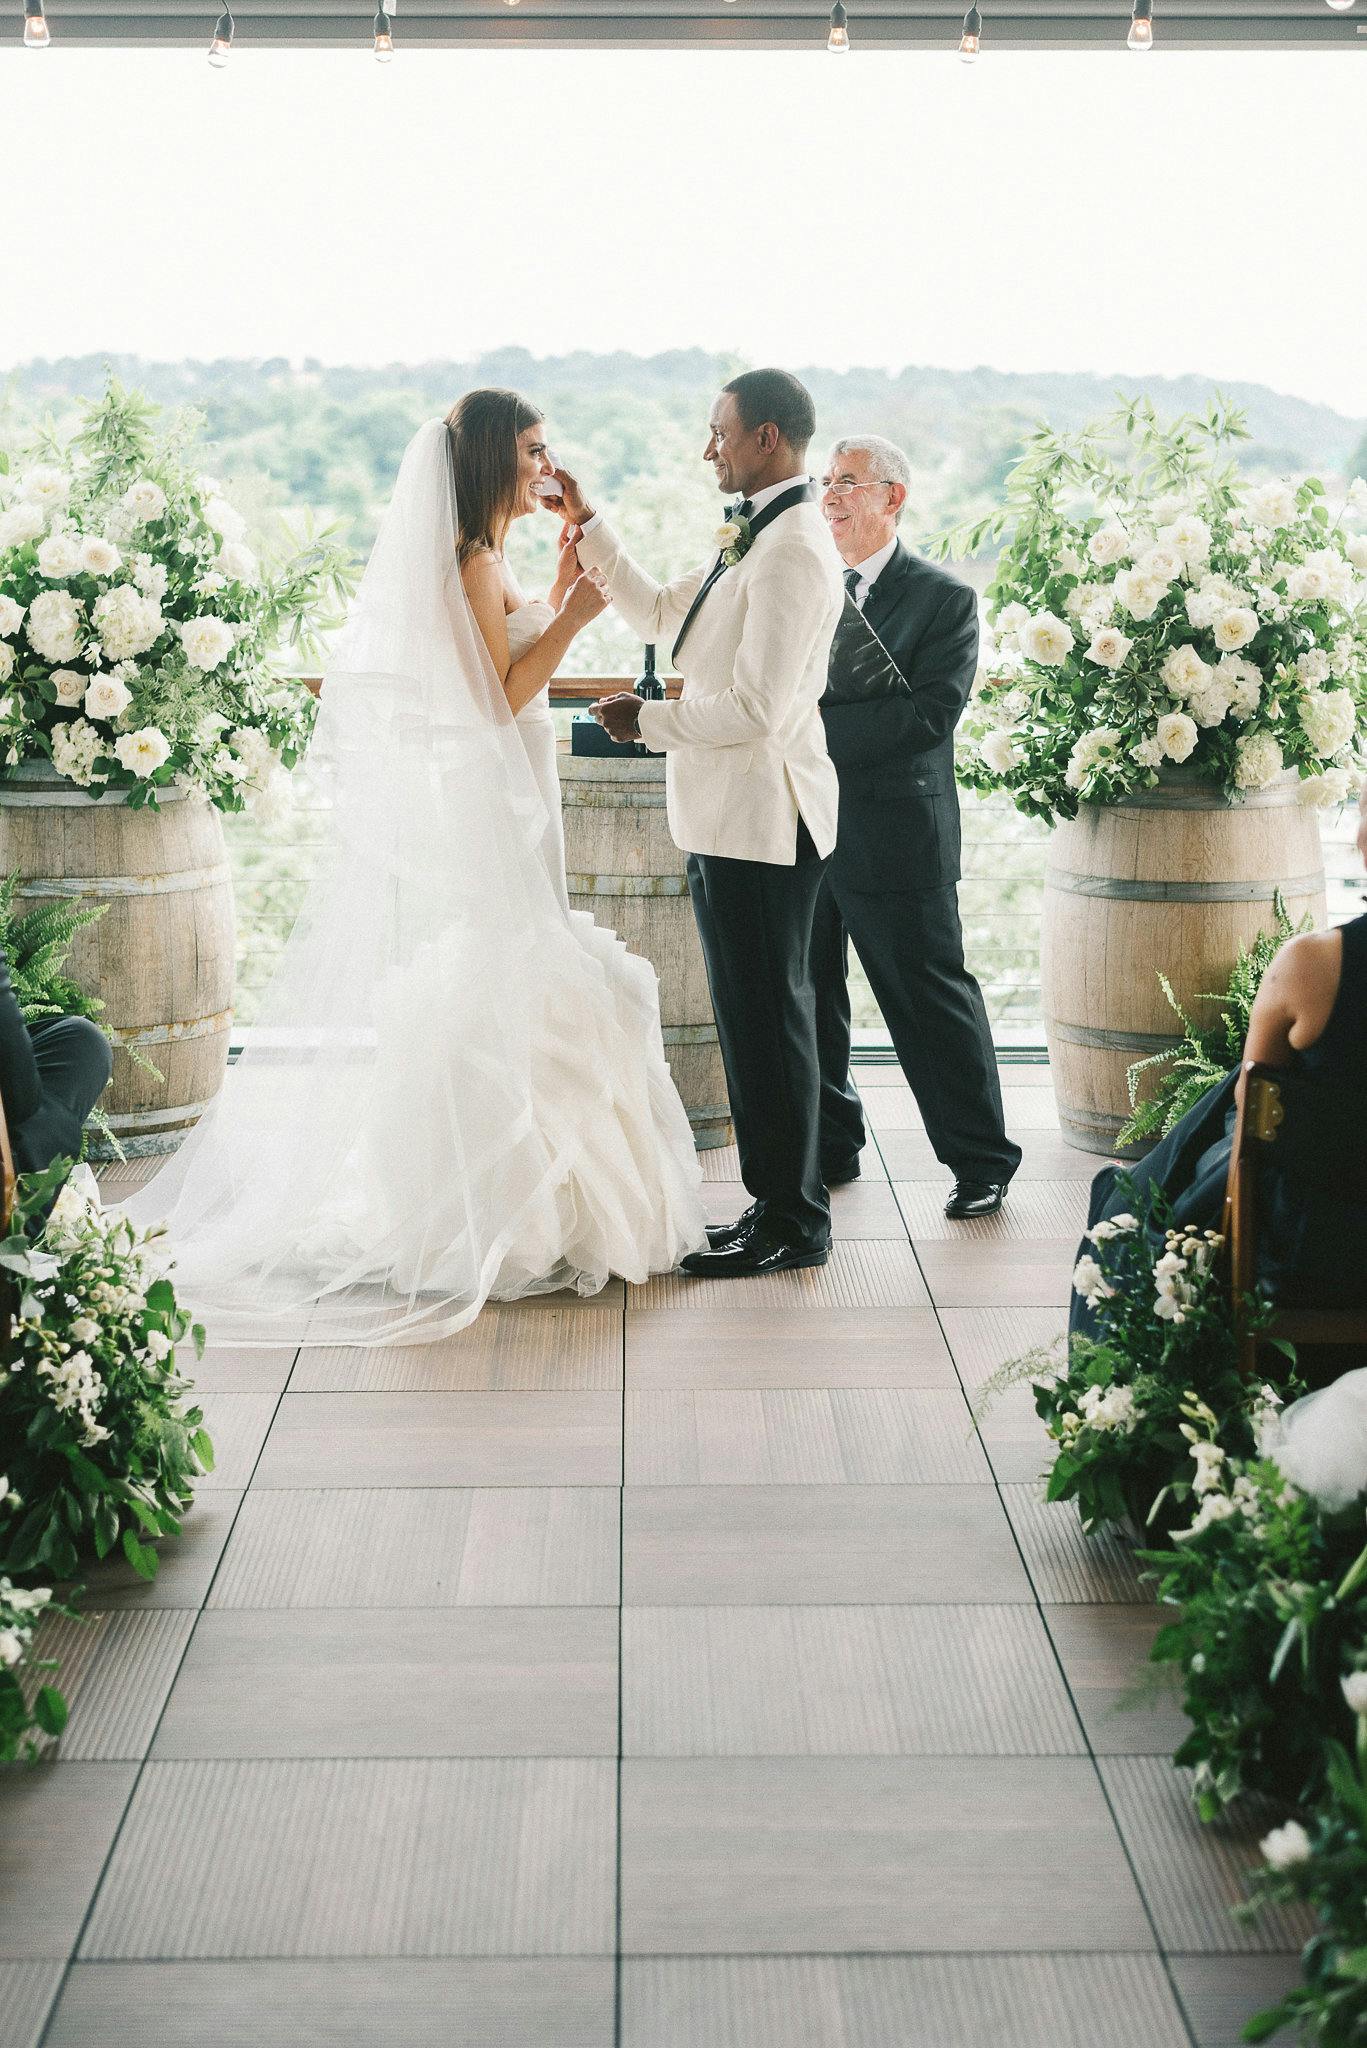 Chic Urban wedding at District Winery | PartySlate